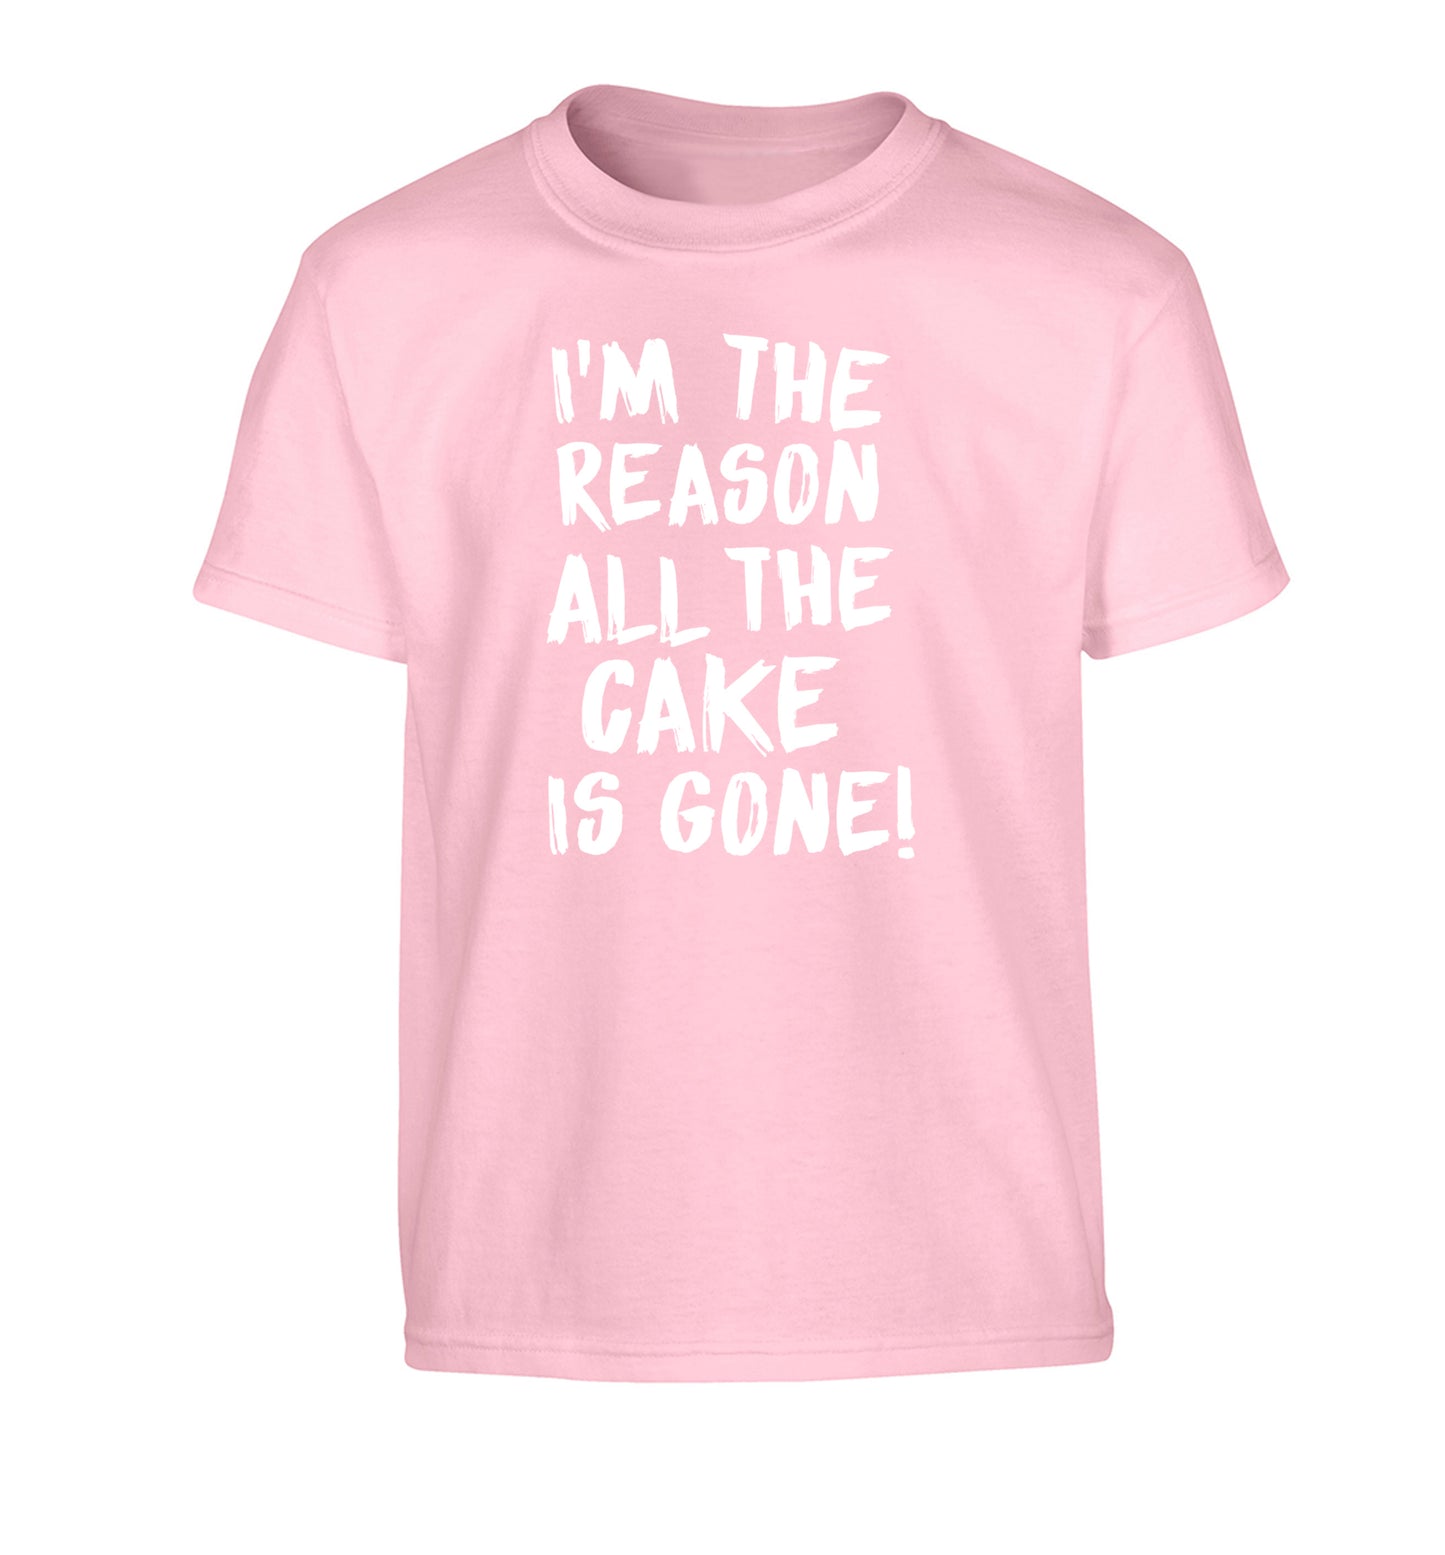 I'm the reason all the cake is gone Children's light pink Tshirt 12-13 Years